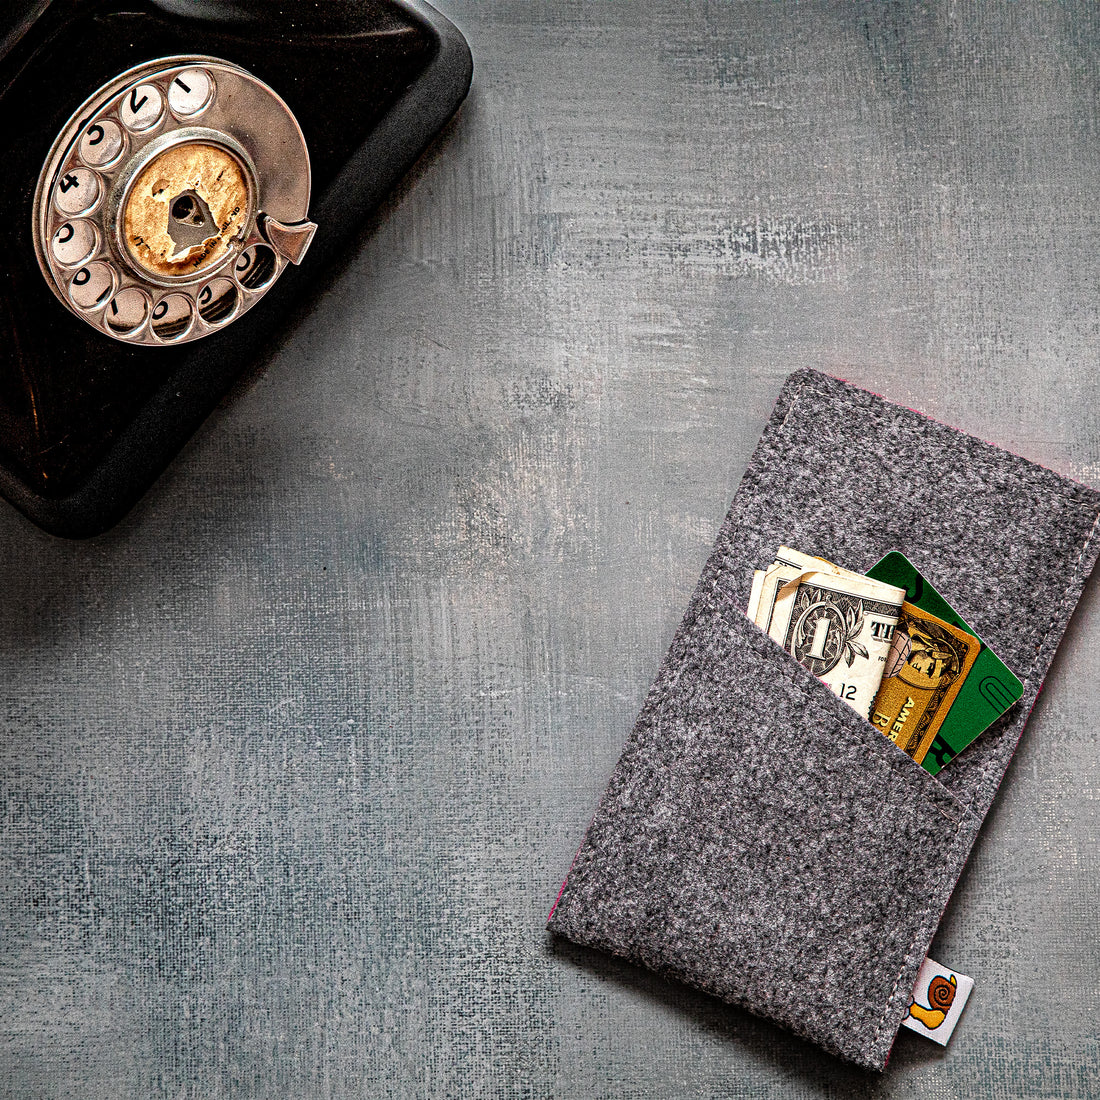 Ultimate iPhone Protection: Why Our Handmade Felt Covers Outshine the Rest